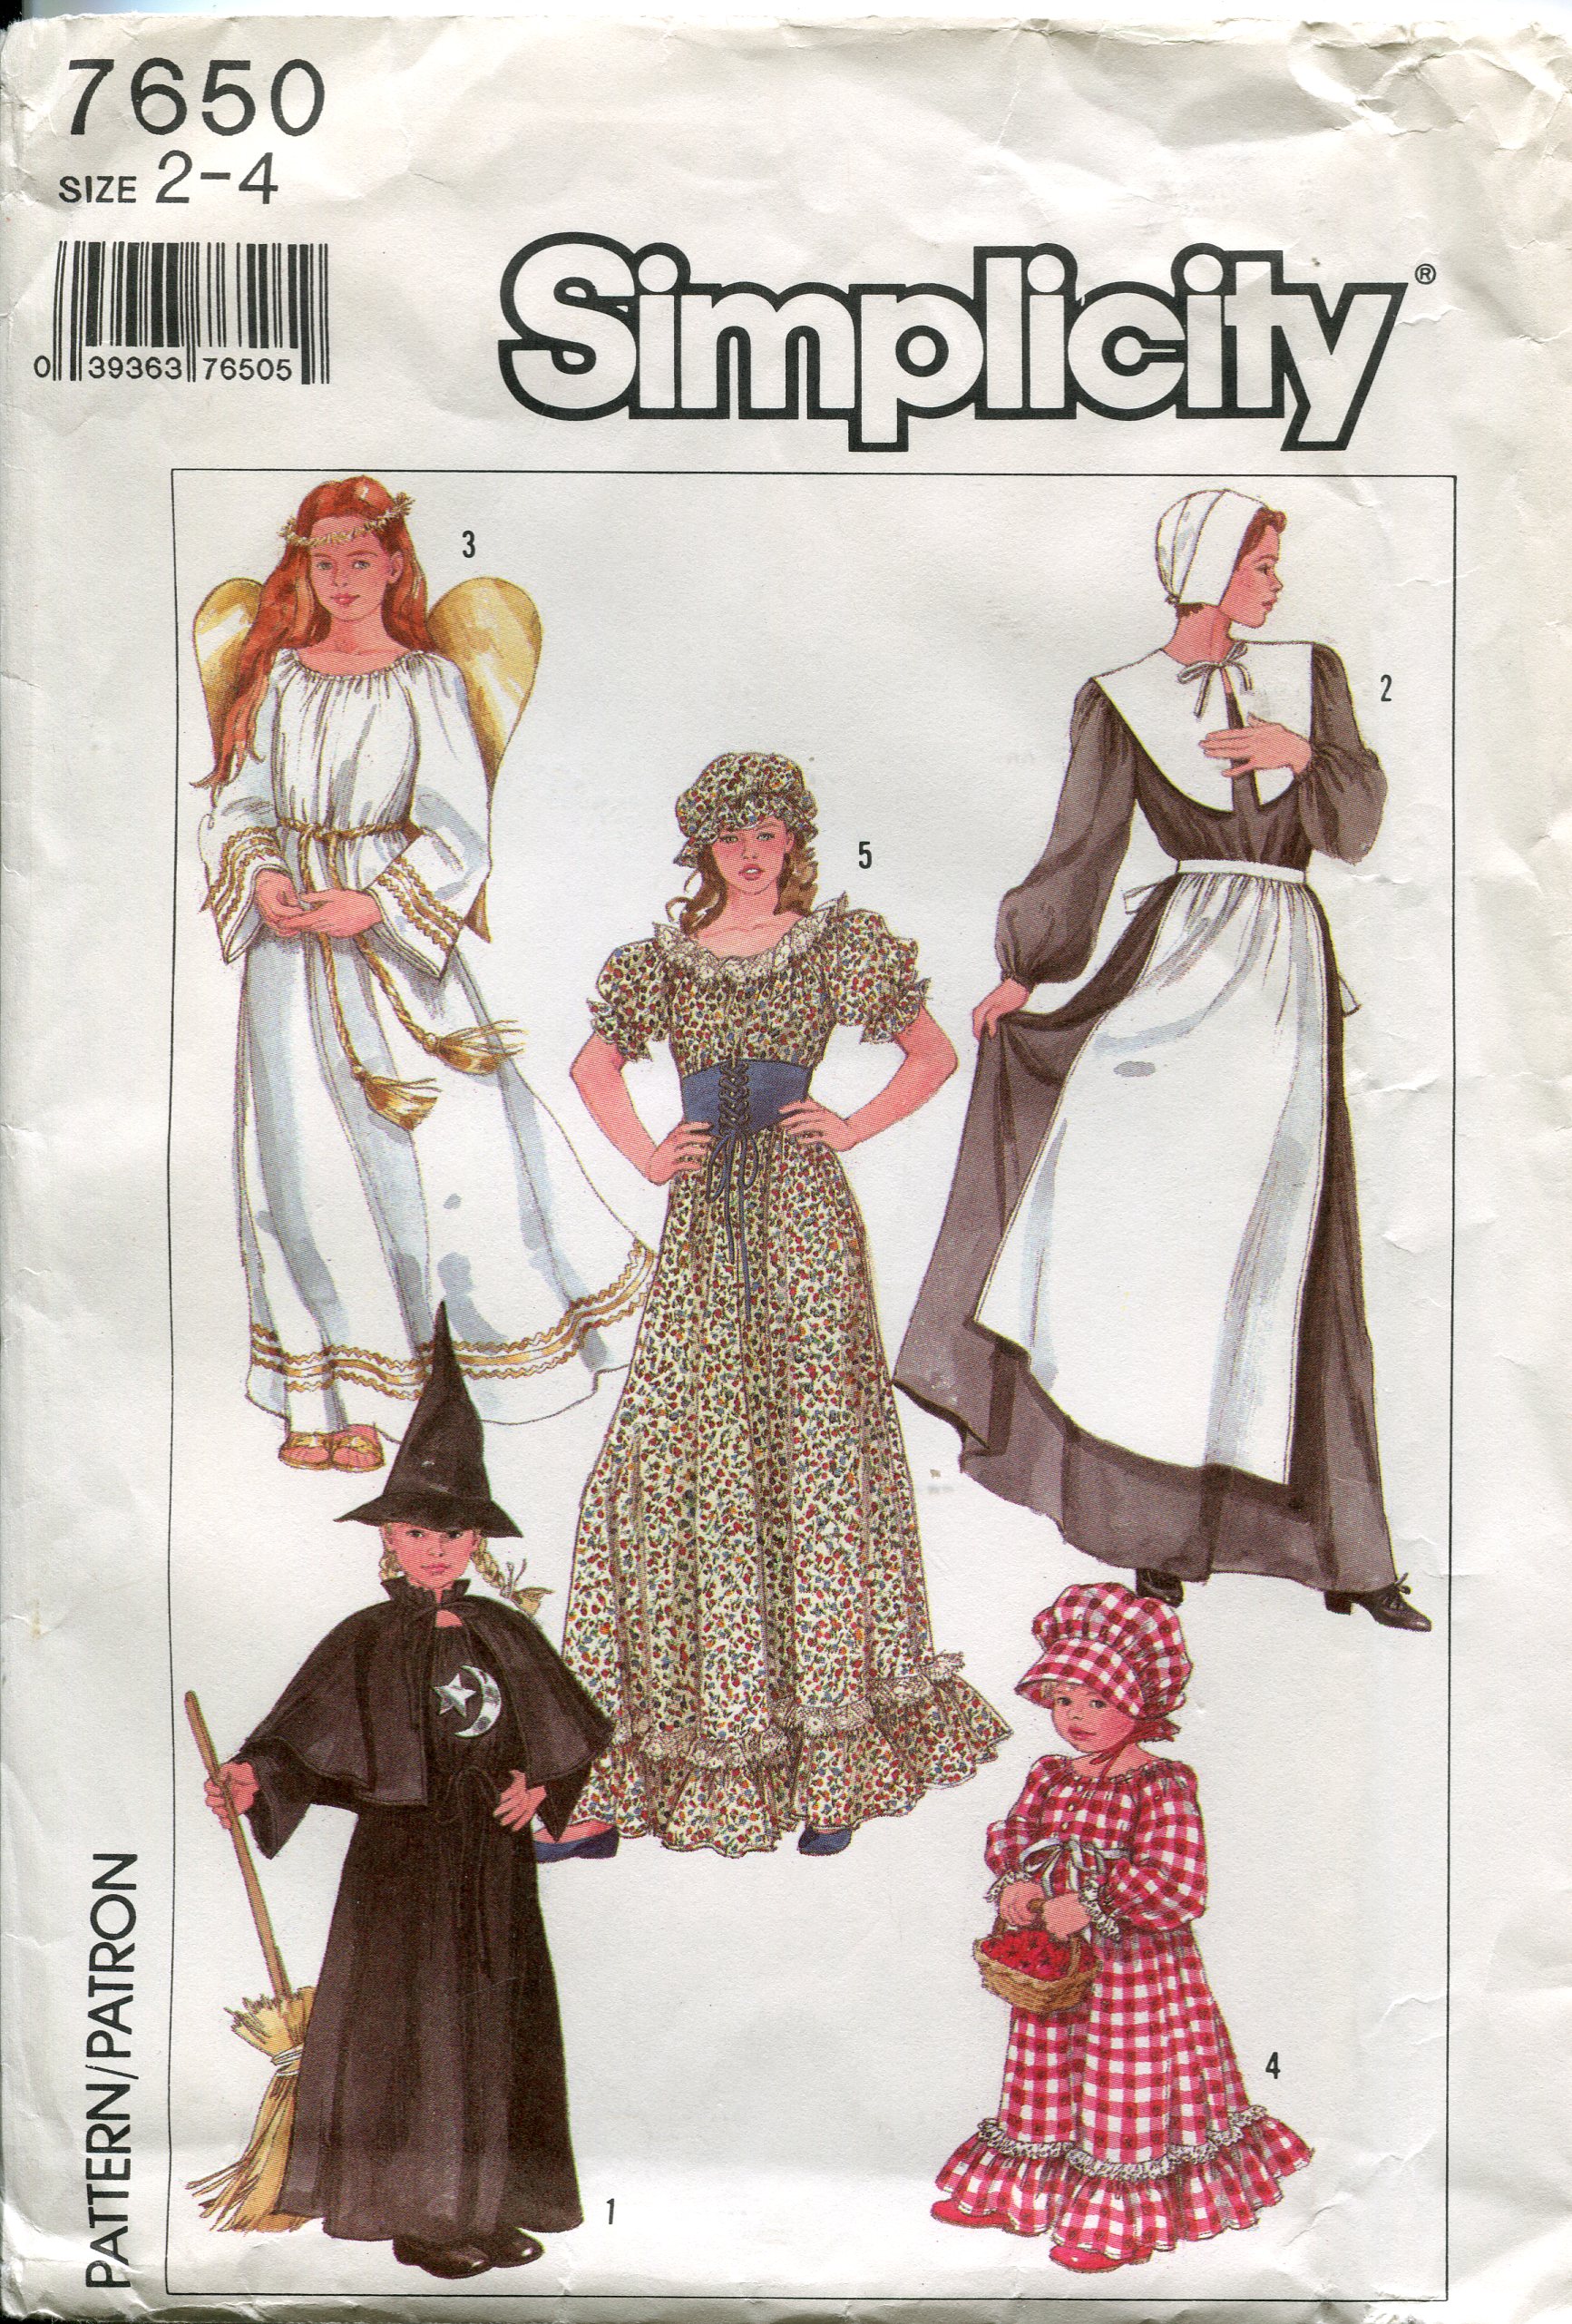 Simplicity 7650 B | Vintage Sewing Patterns | FANDOM powered by Wikia